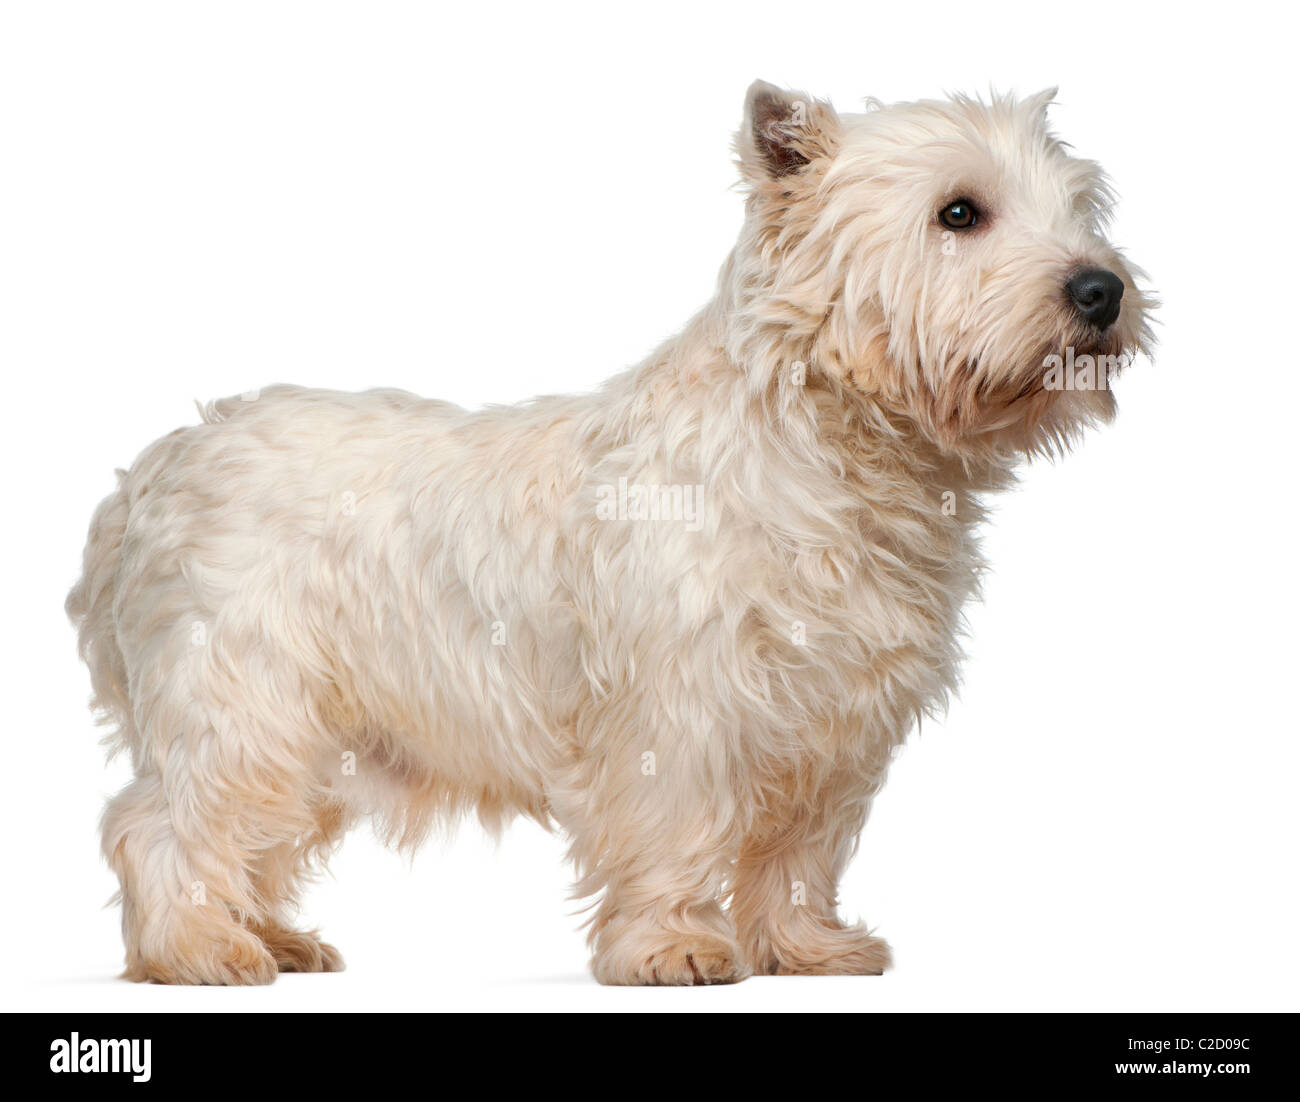 West Highland White Terrier, 3 years old, against white background Stock Photo